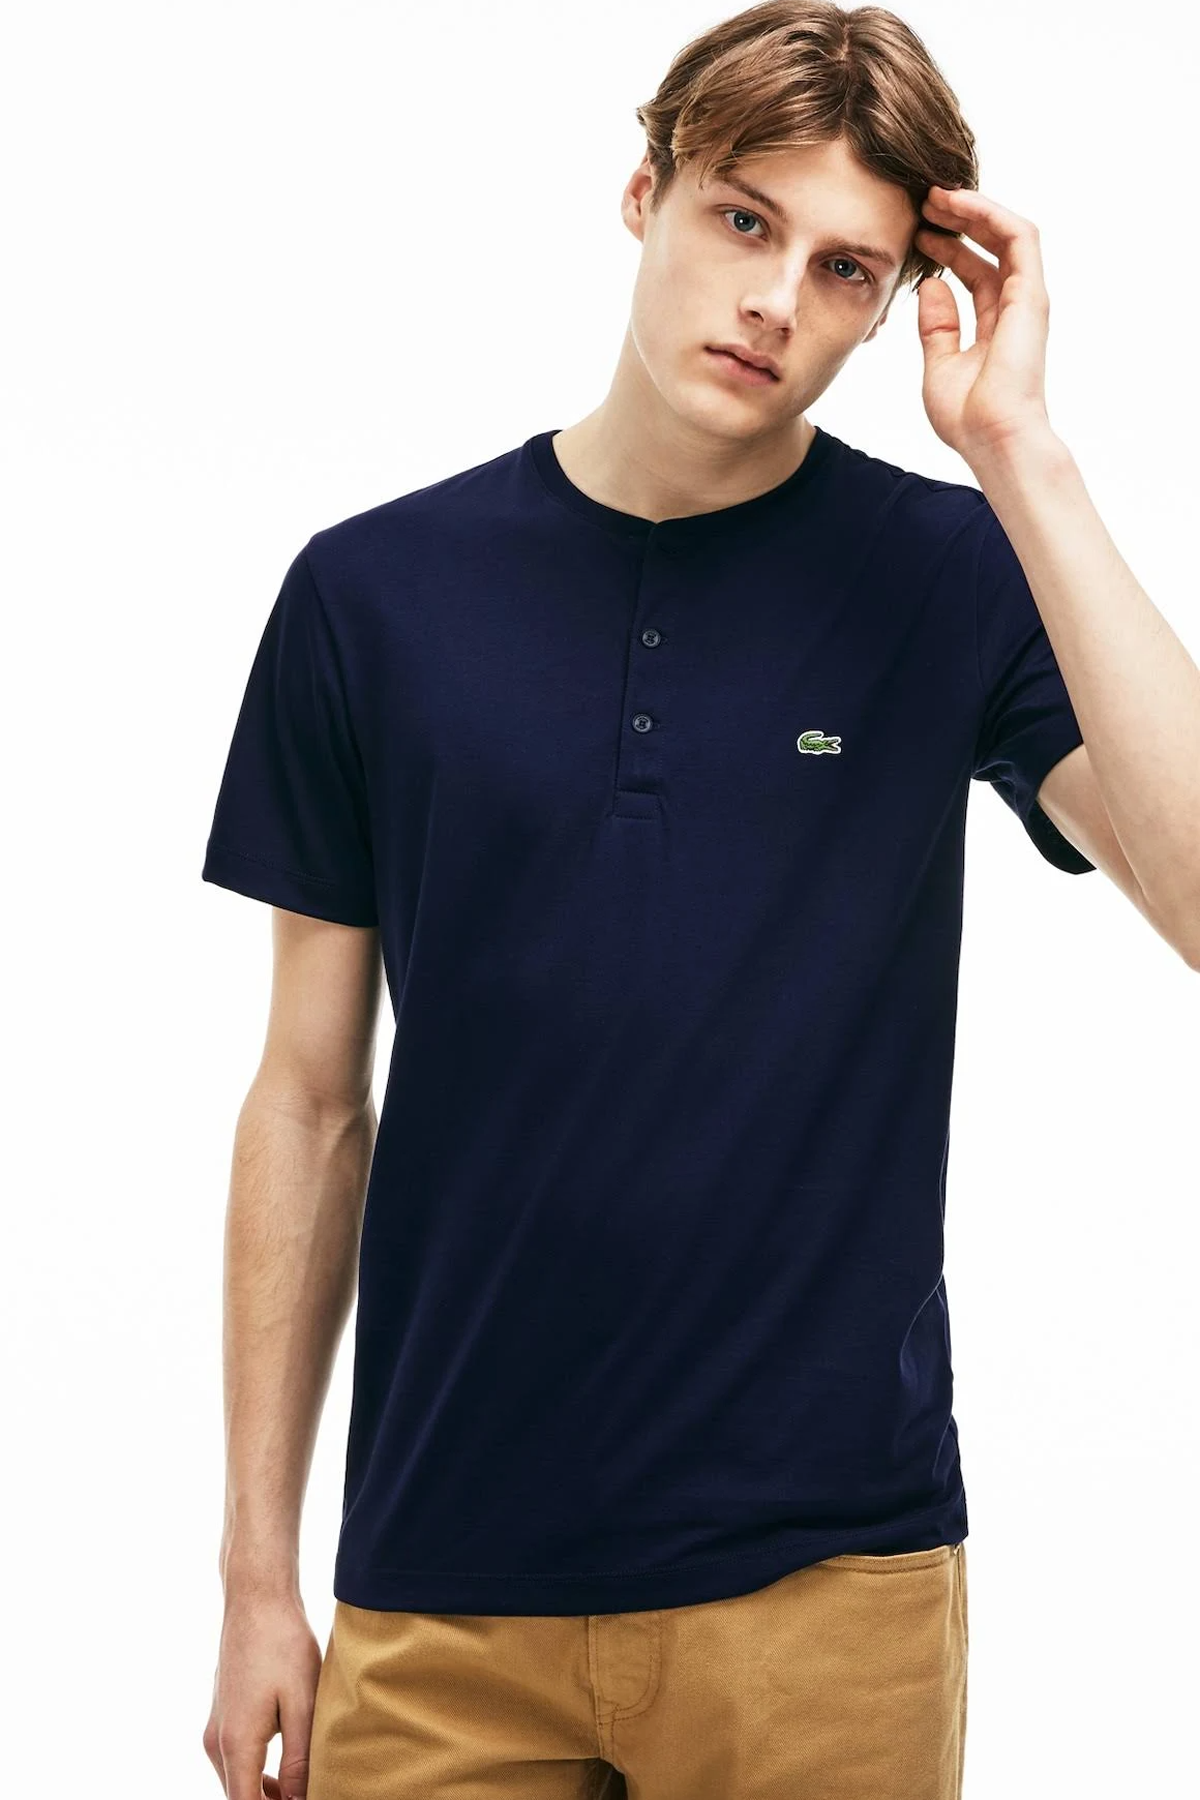 Lacoste Navy Blue th0884 embroidered logo shirts